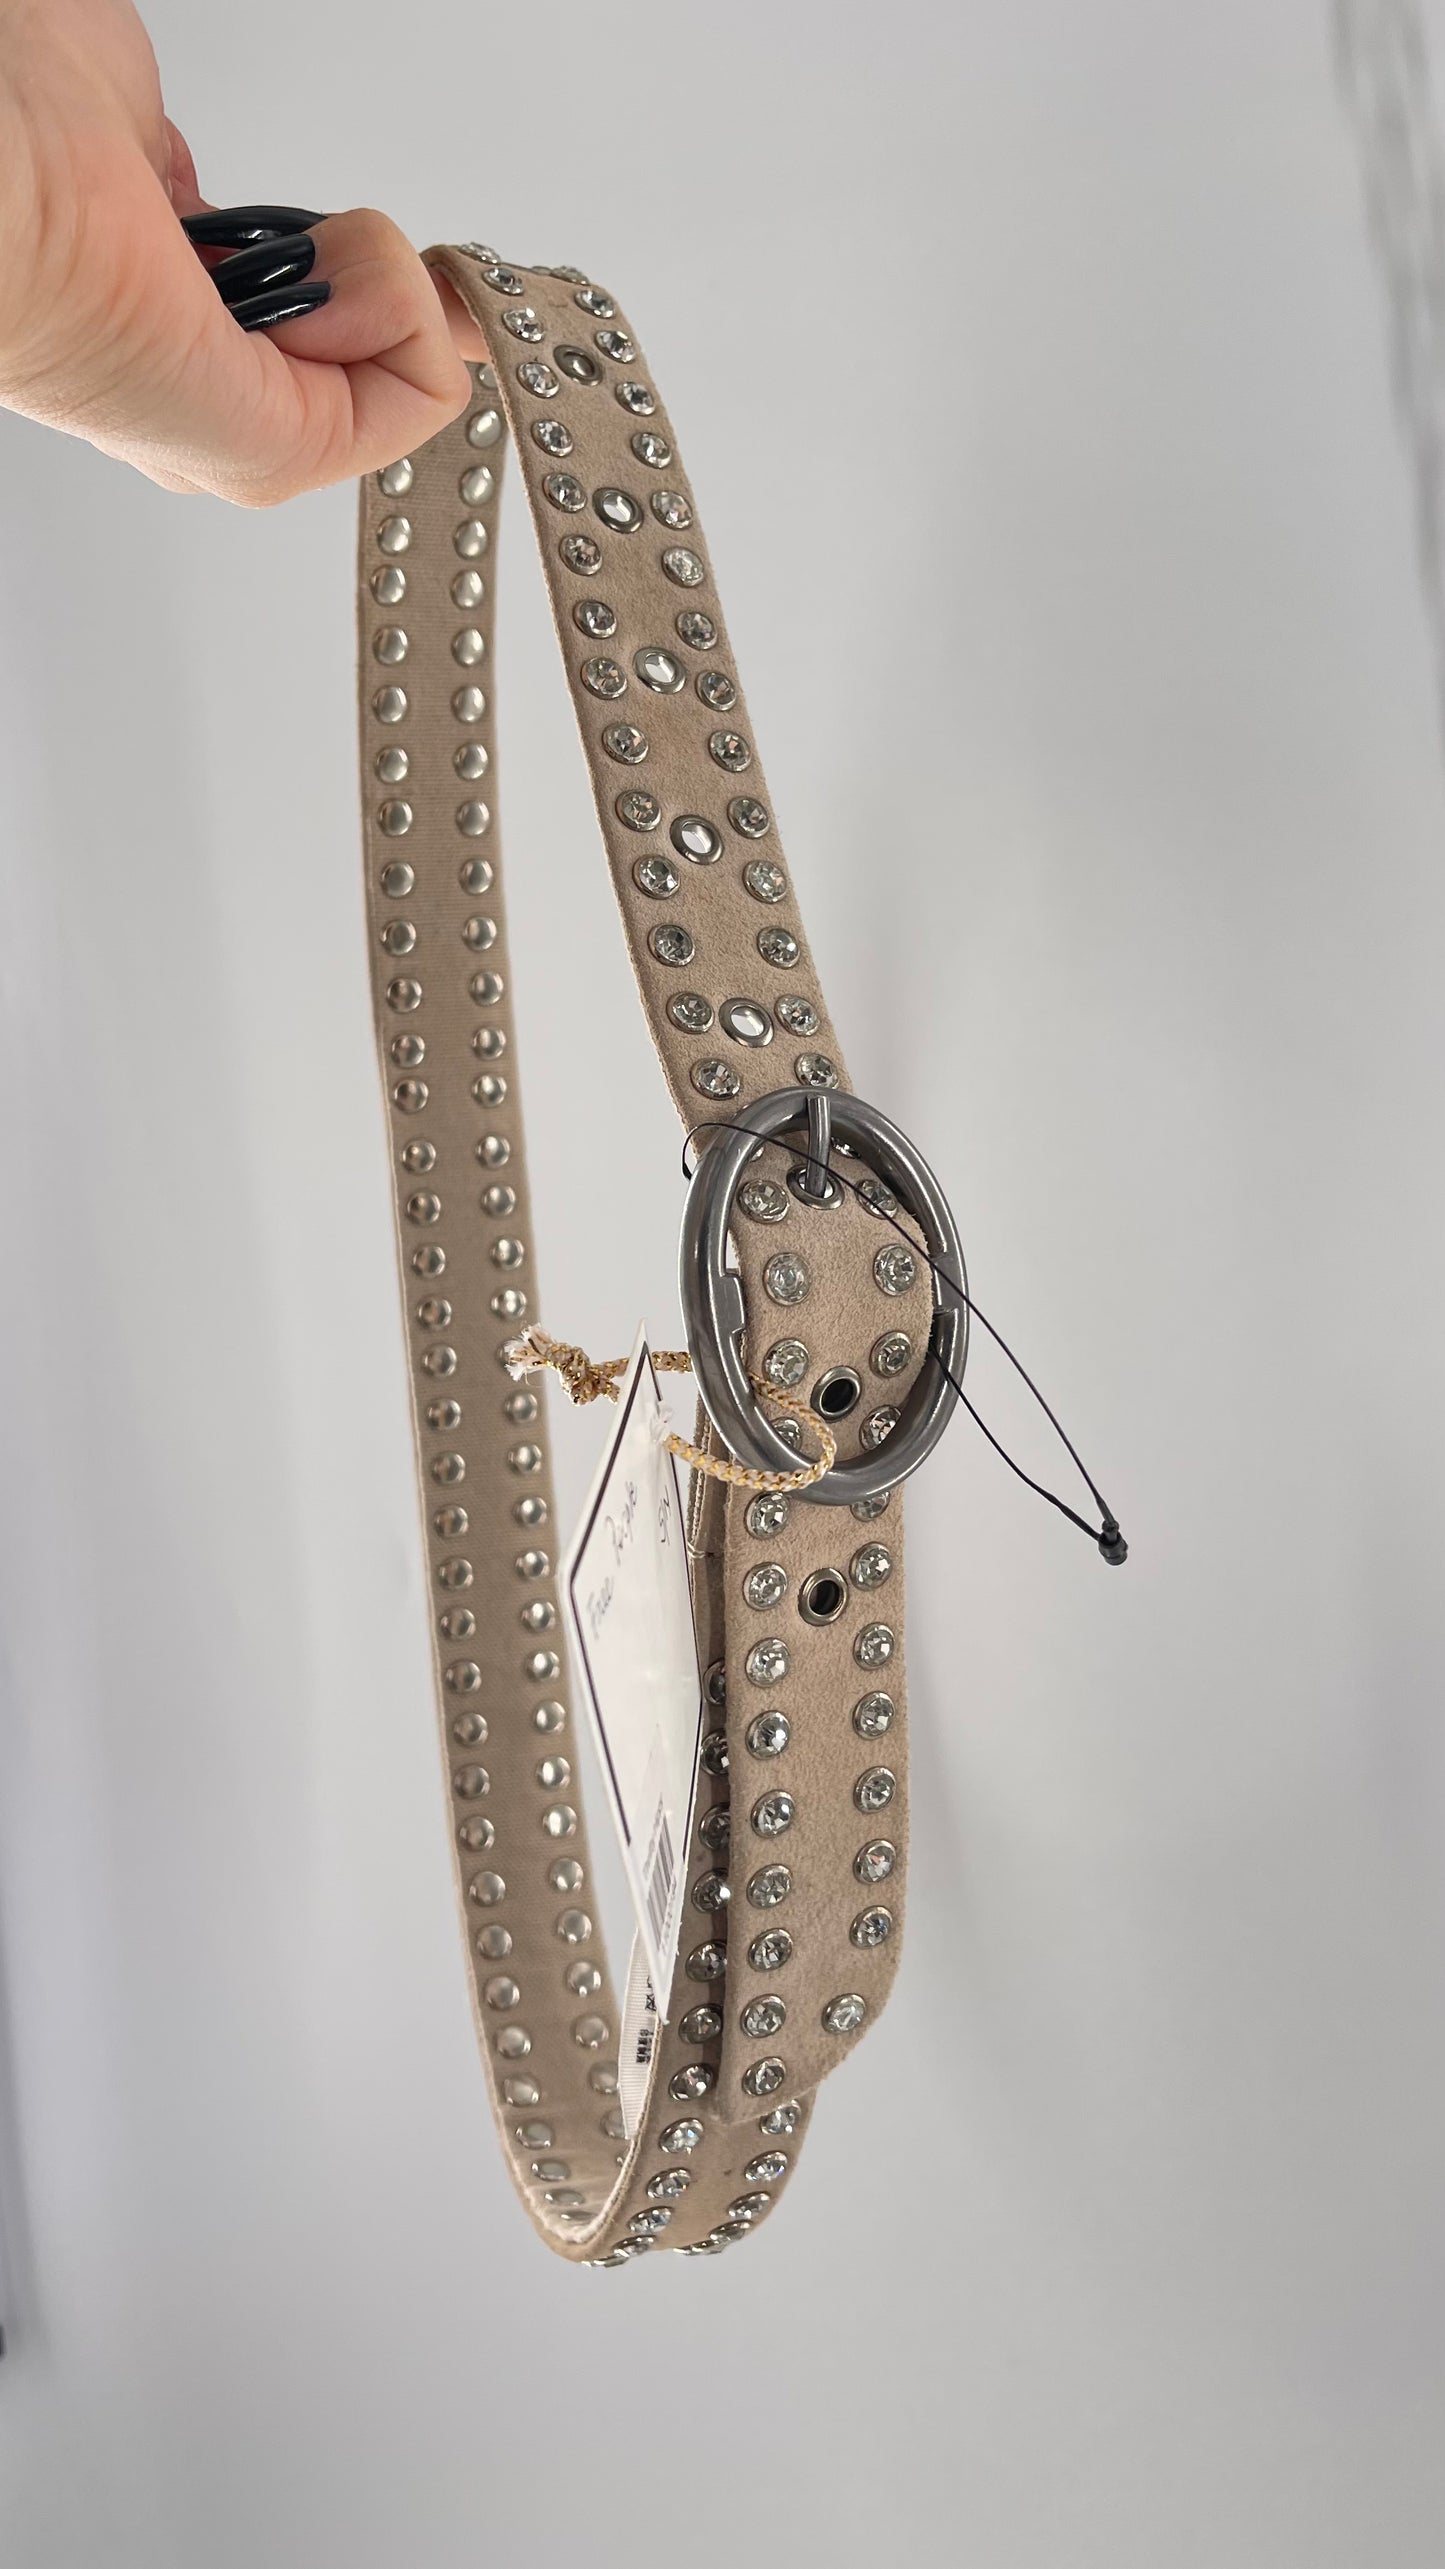 Free People Beige Leather Canvas Studded Rhinestone Crystal Studded Belt with Heavy Metal Buckle (S/M)